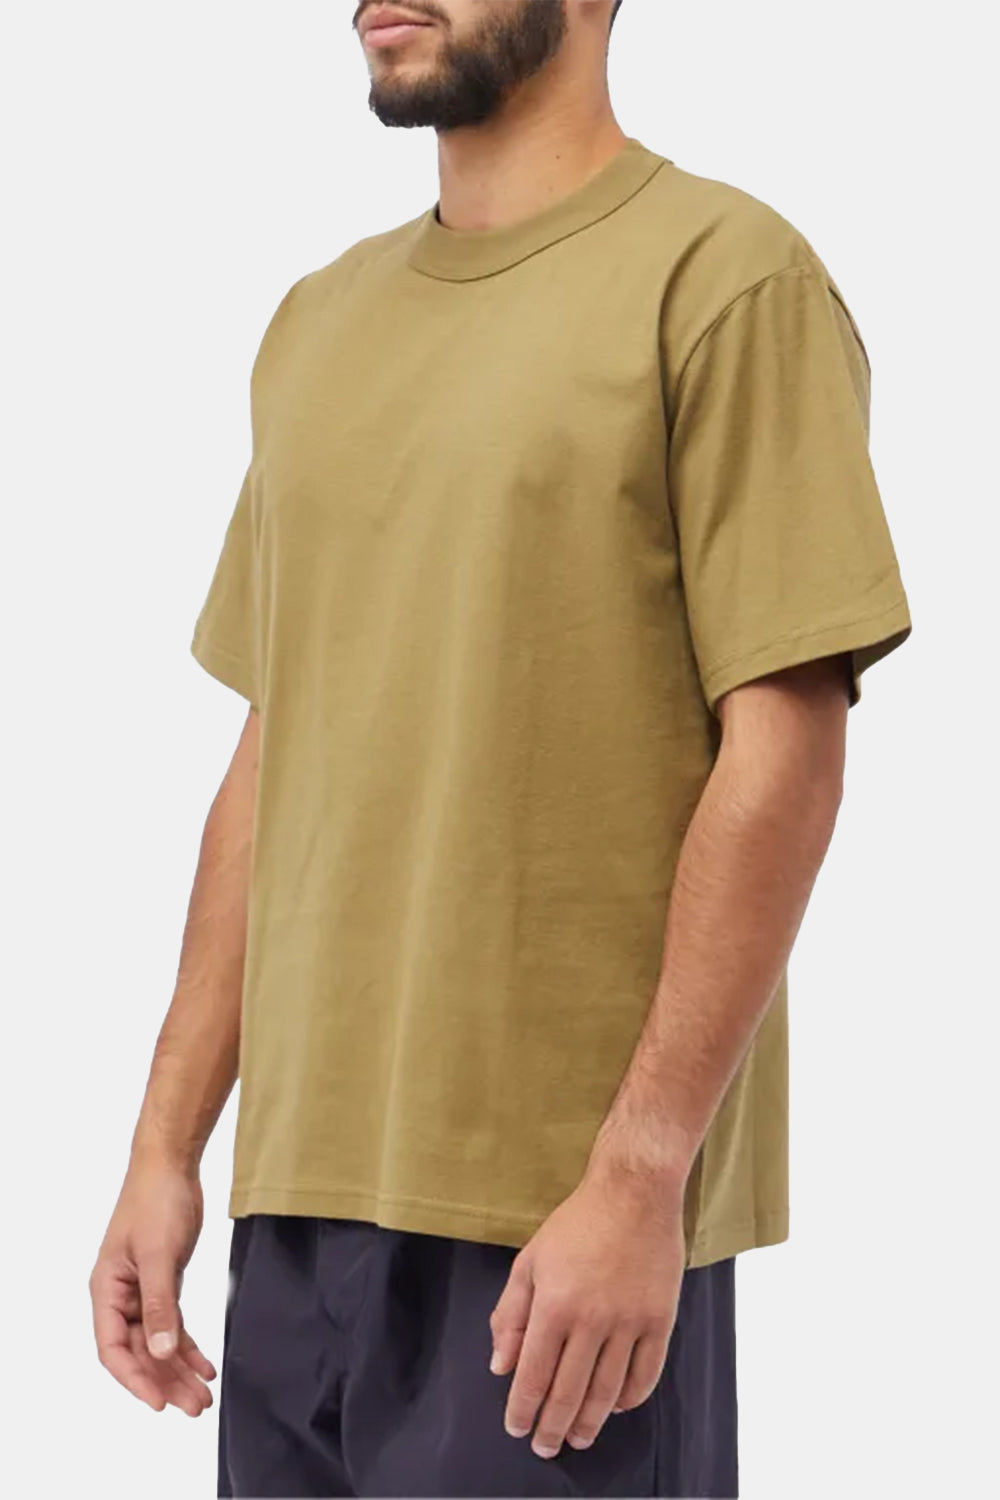 Armor Lux Heritage Organic Callac T-Shirt (Olive)
